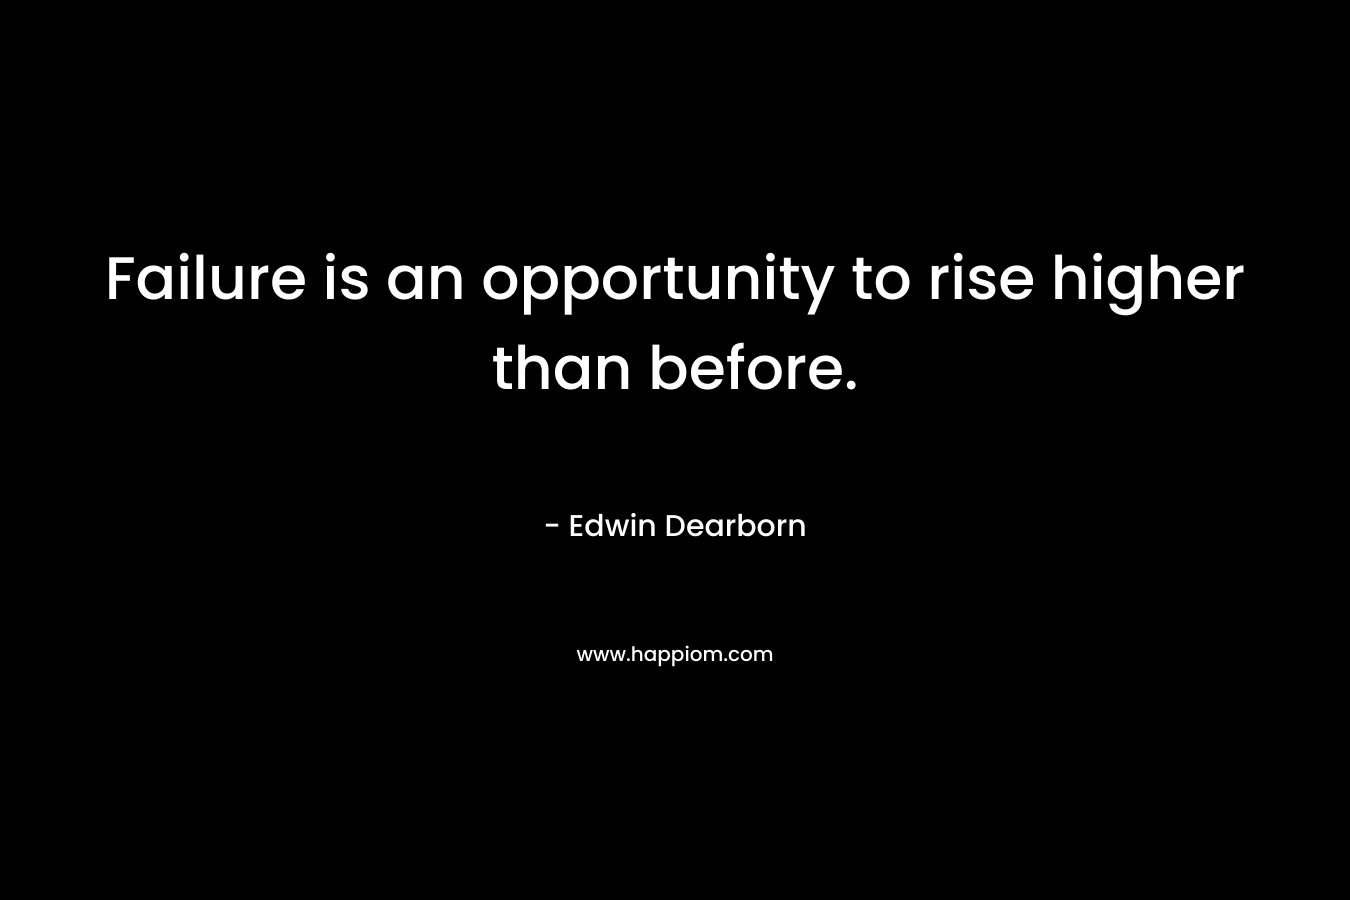 Failure is an opportunity to rise higher than before. – Edwin Dearborn